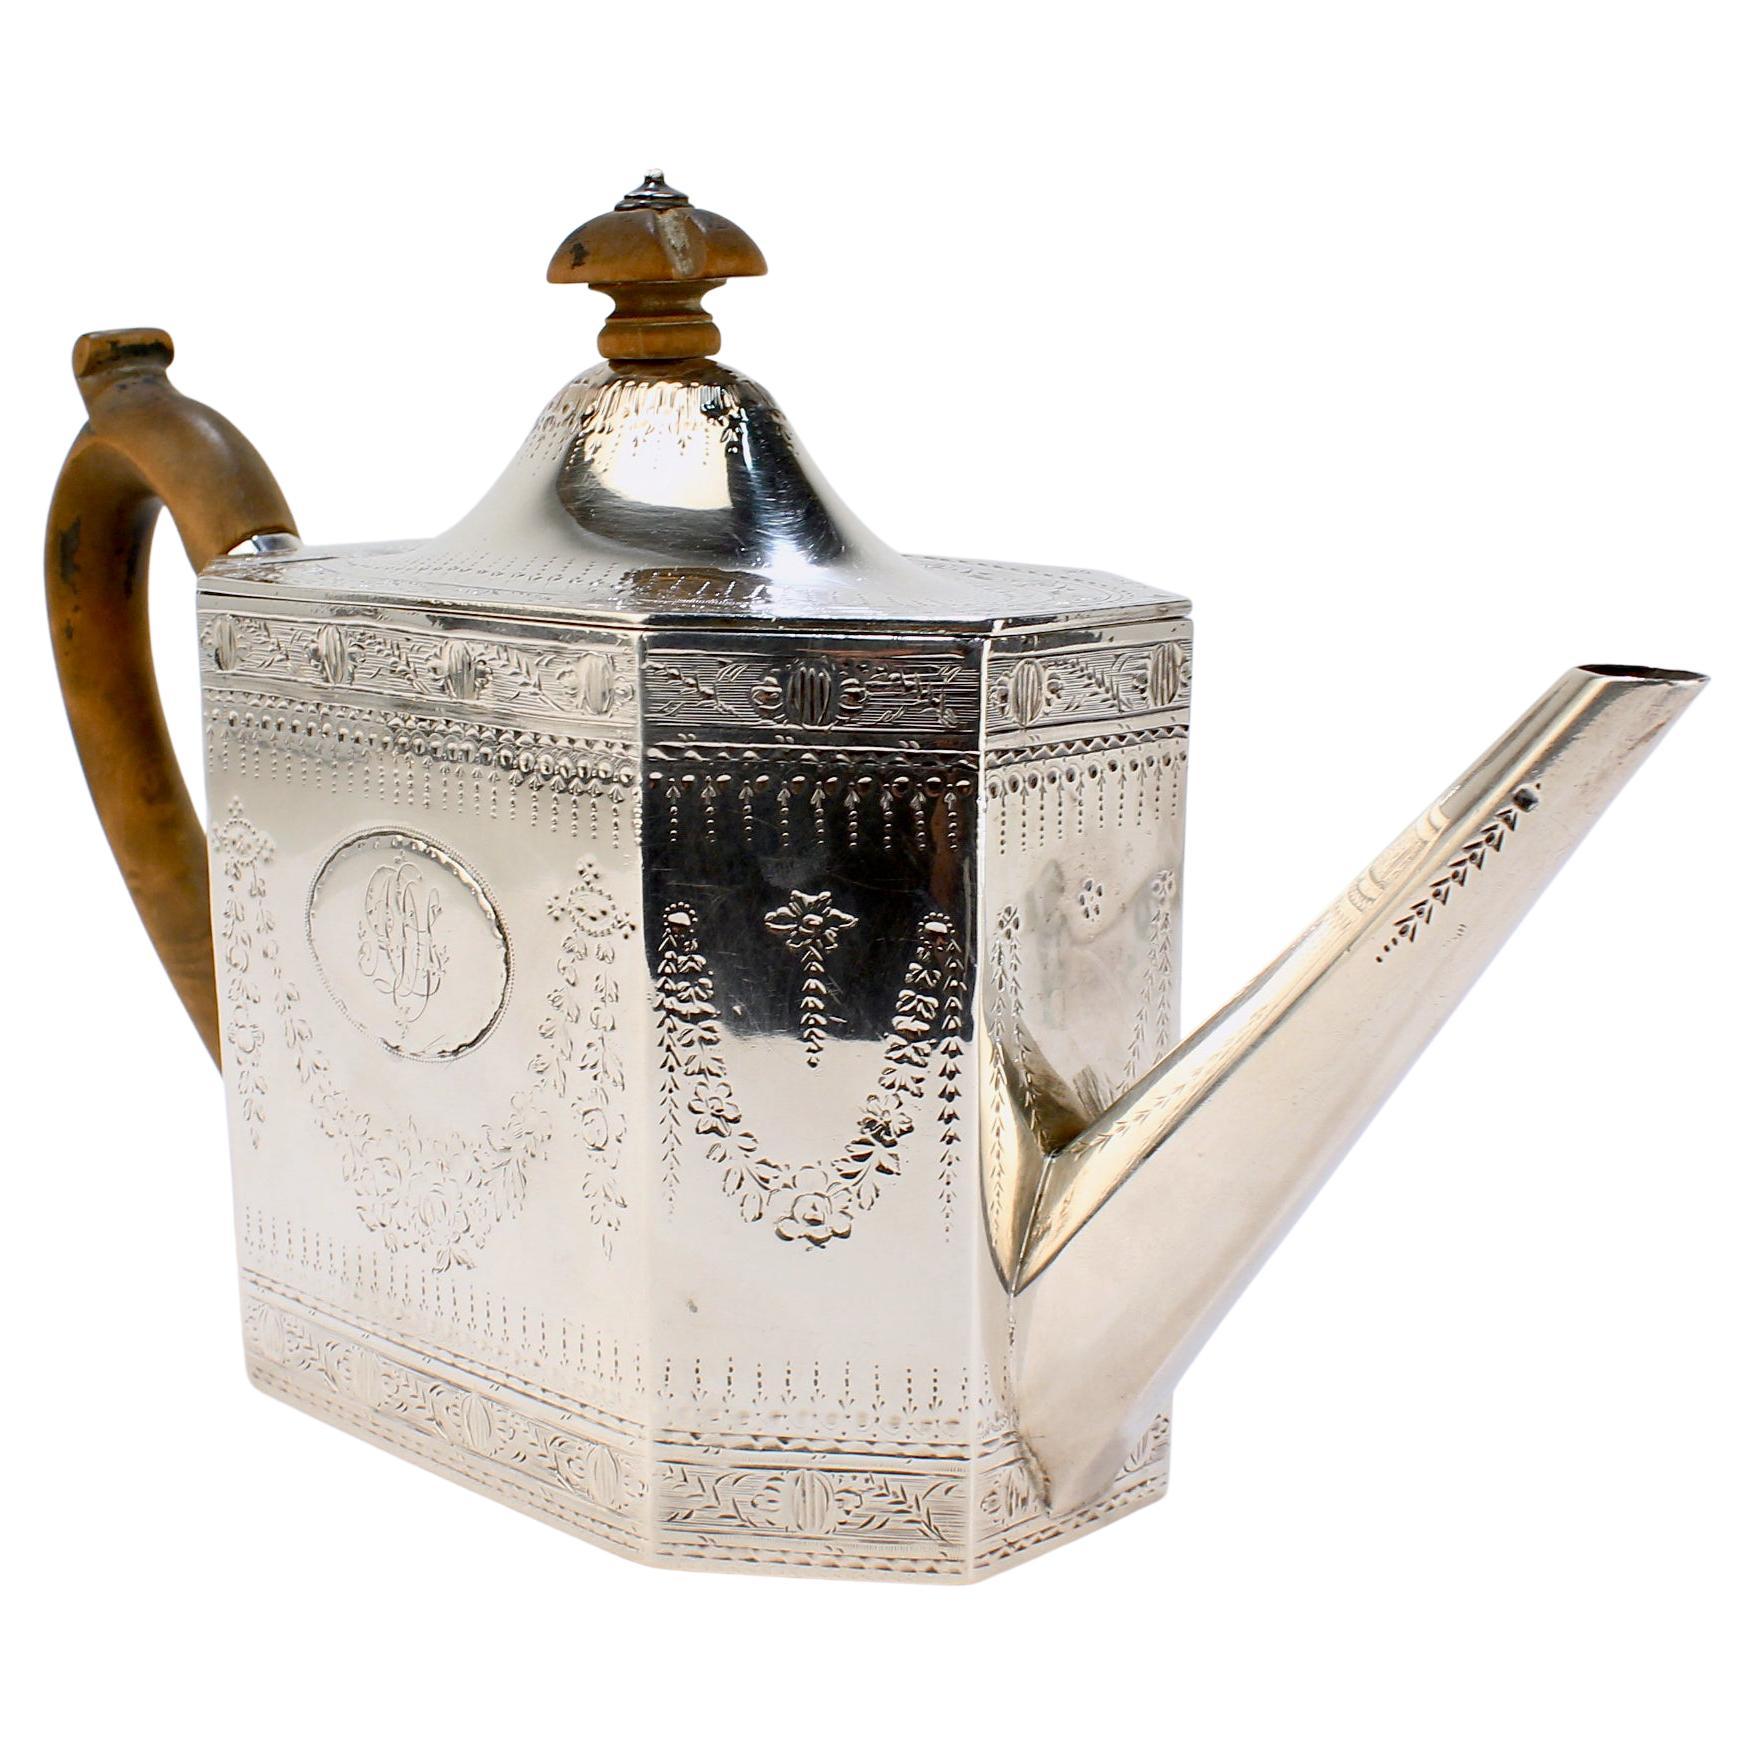 Antique Georgian Sterling Silver Teapot by William Sumner I of London, 1787